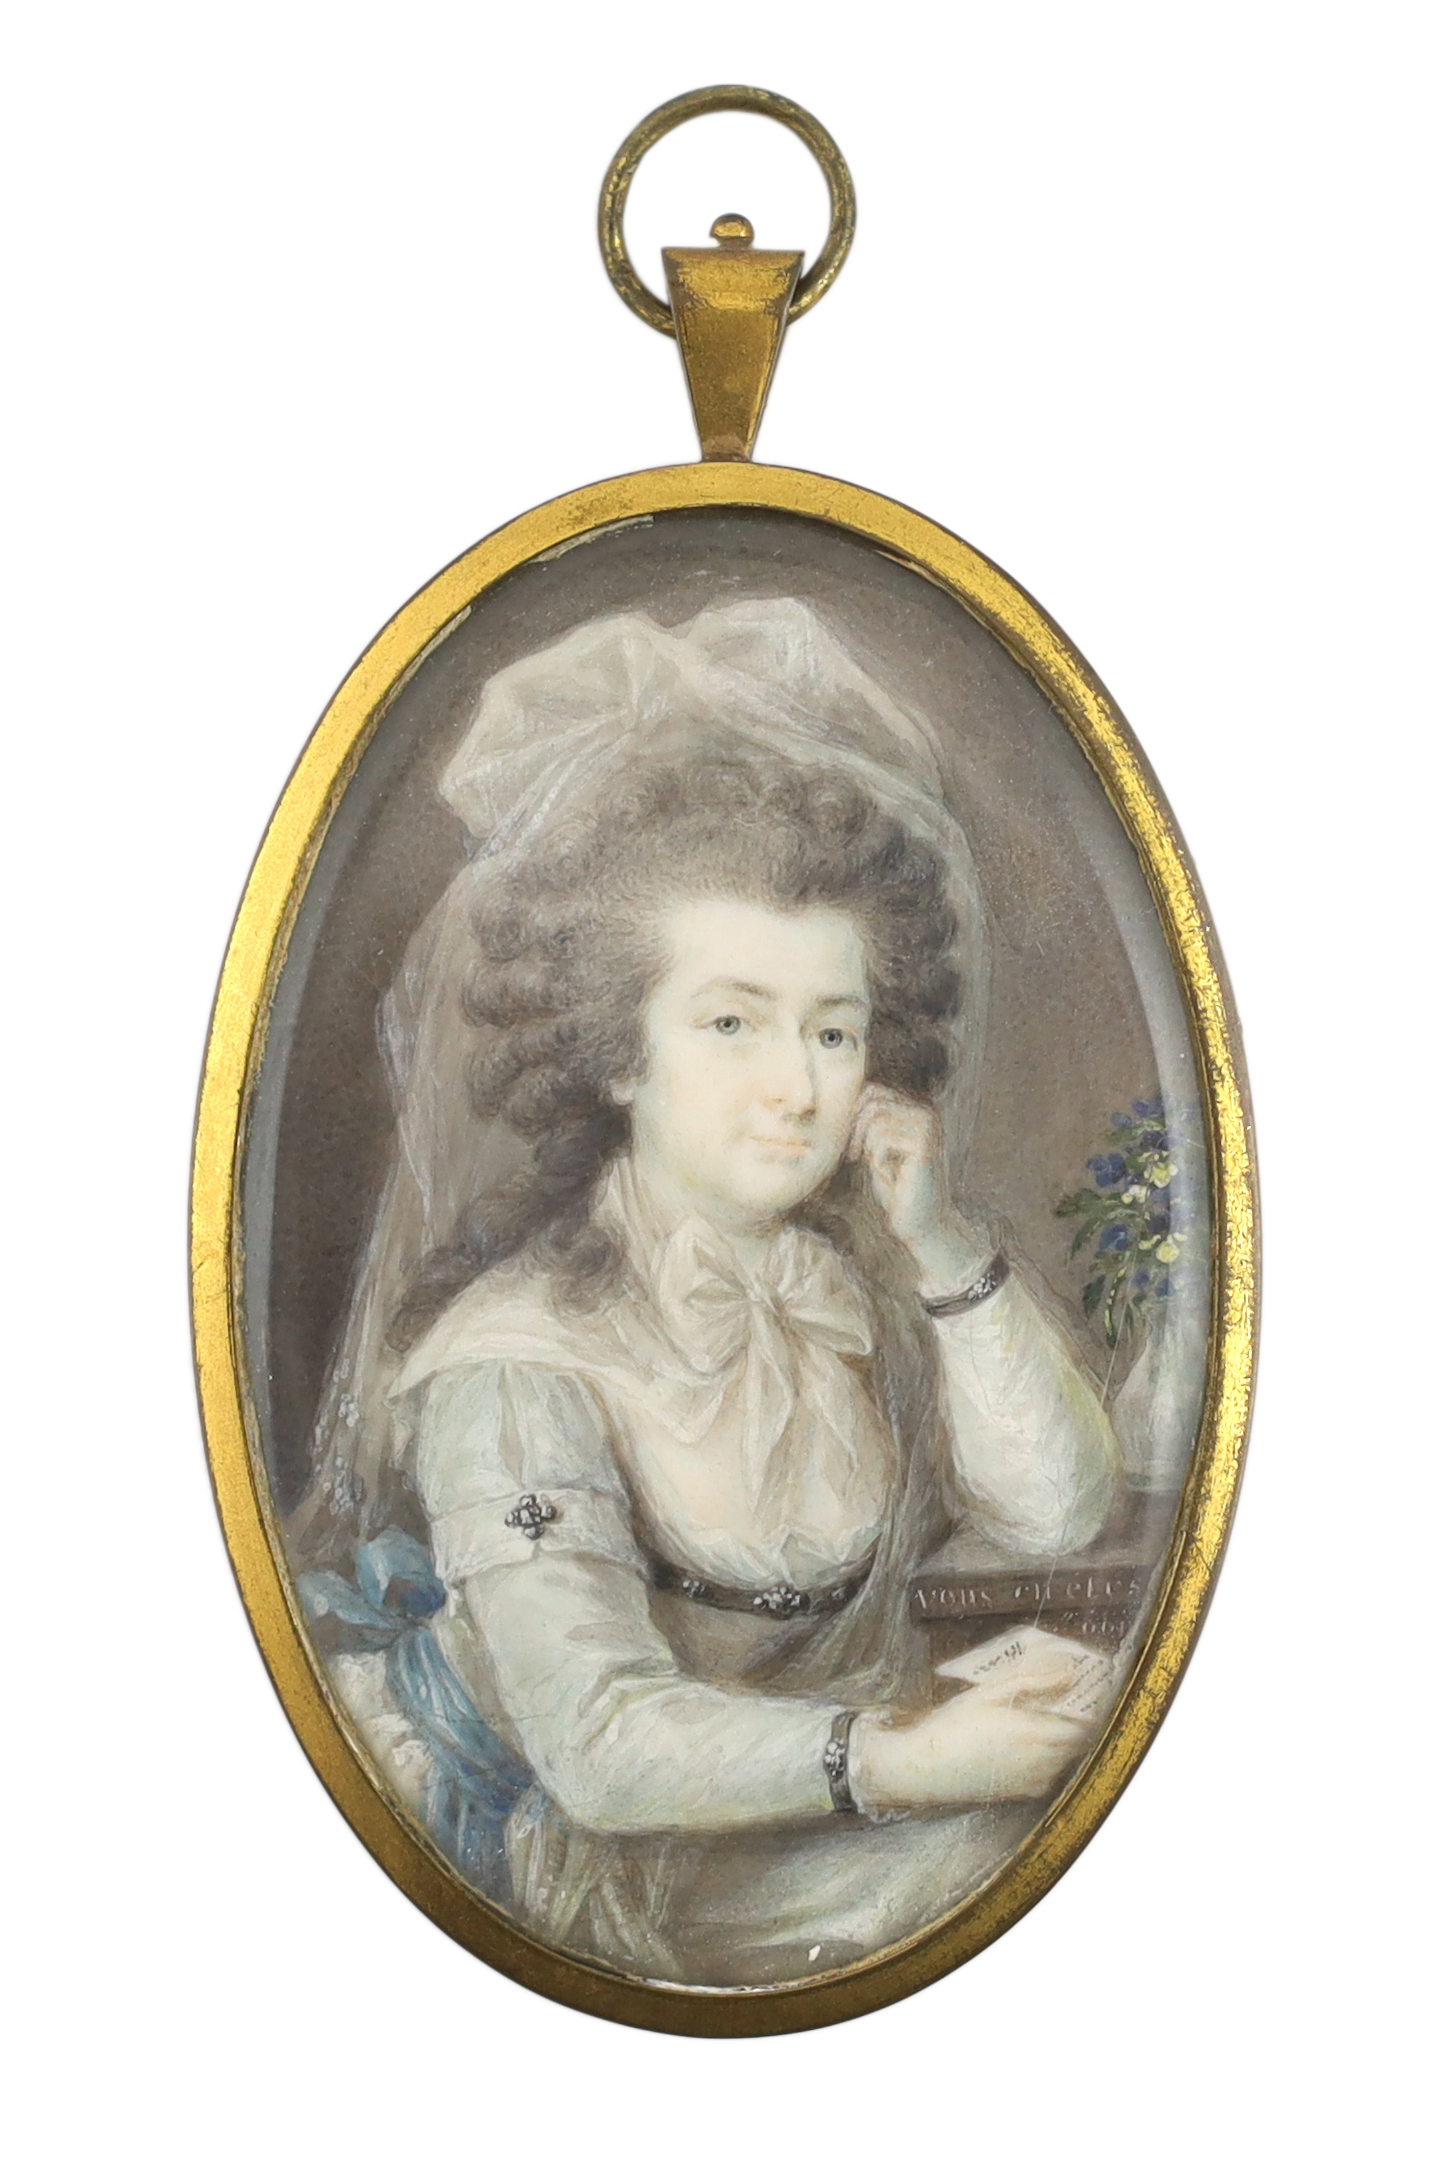 French School circa 1800, Portrait miniature of a lady, watercolour on ivory, 7.2 x 4.7cm. CITES Submission reference F5FGY9TT